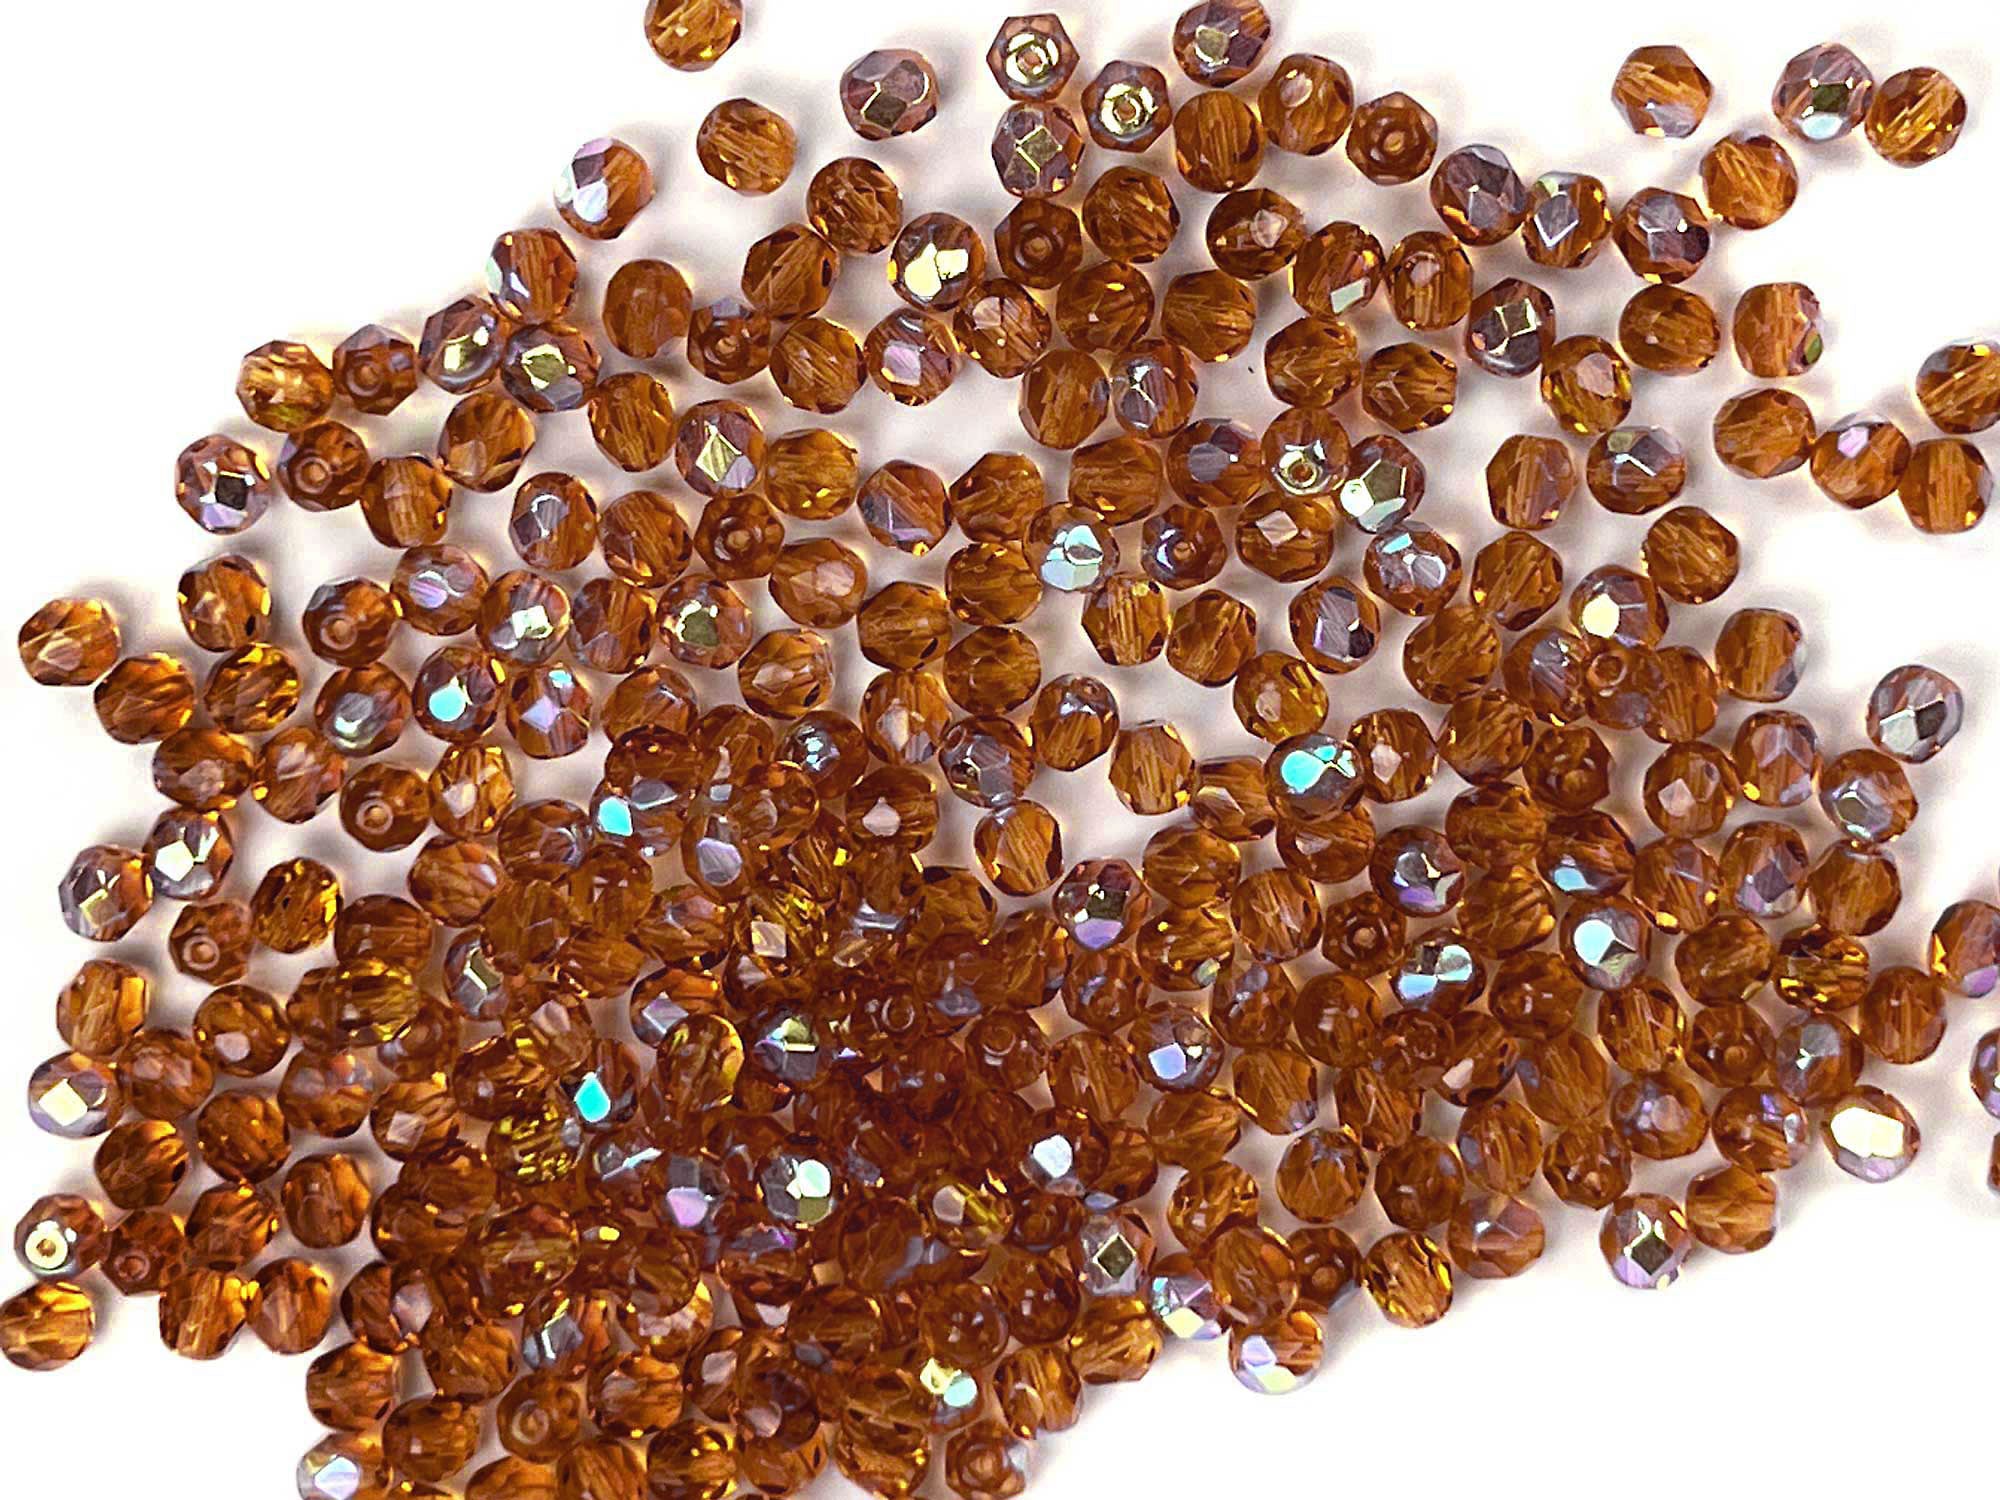 Medium Topaz AB coated Czech Fire Polished Round Faceted Glass Beads 16 inch strands medium brown with Aurora Borealis coating 3mm 4mm 6mm 8mm